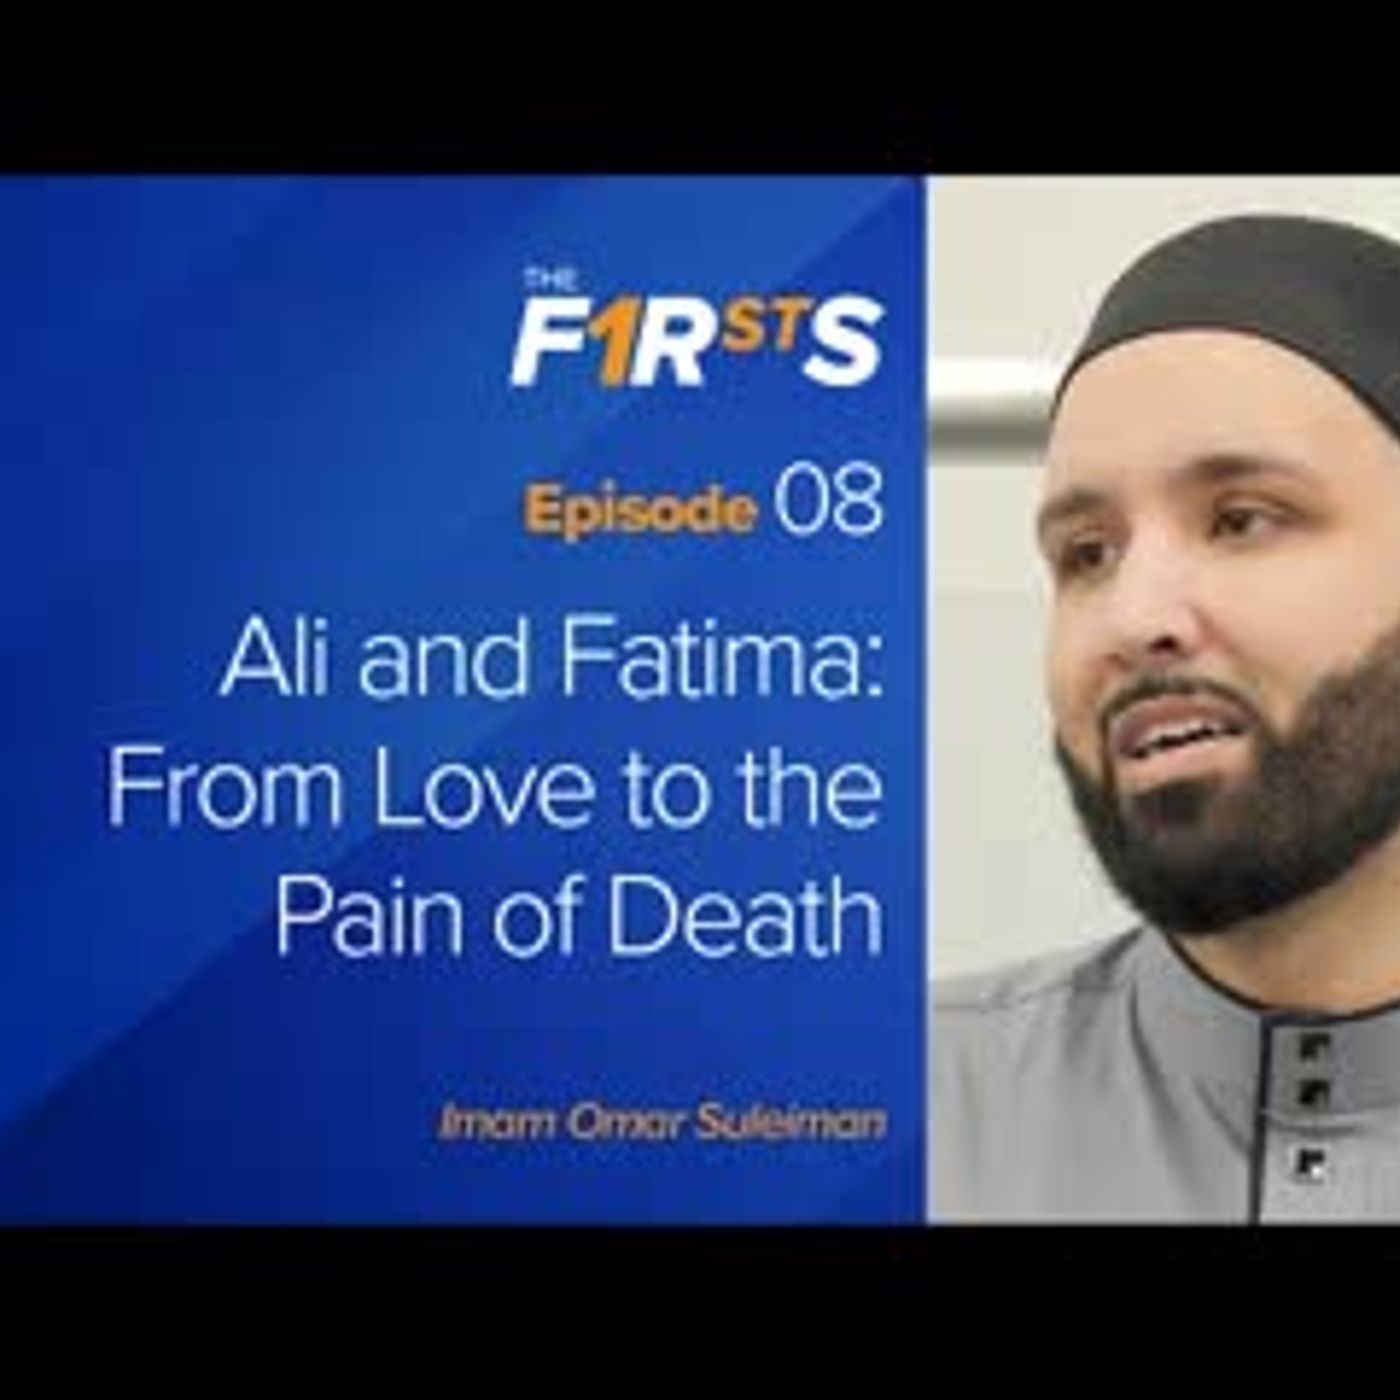 Ali (ra) and Fatima (ra) From Love to the Pain of Death   The Firsts   Dr. Omar Suleiman